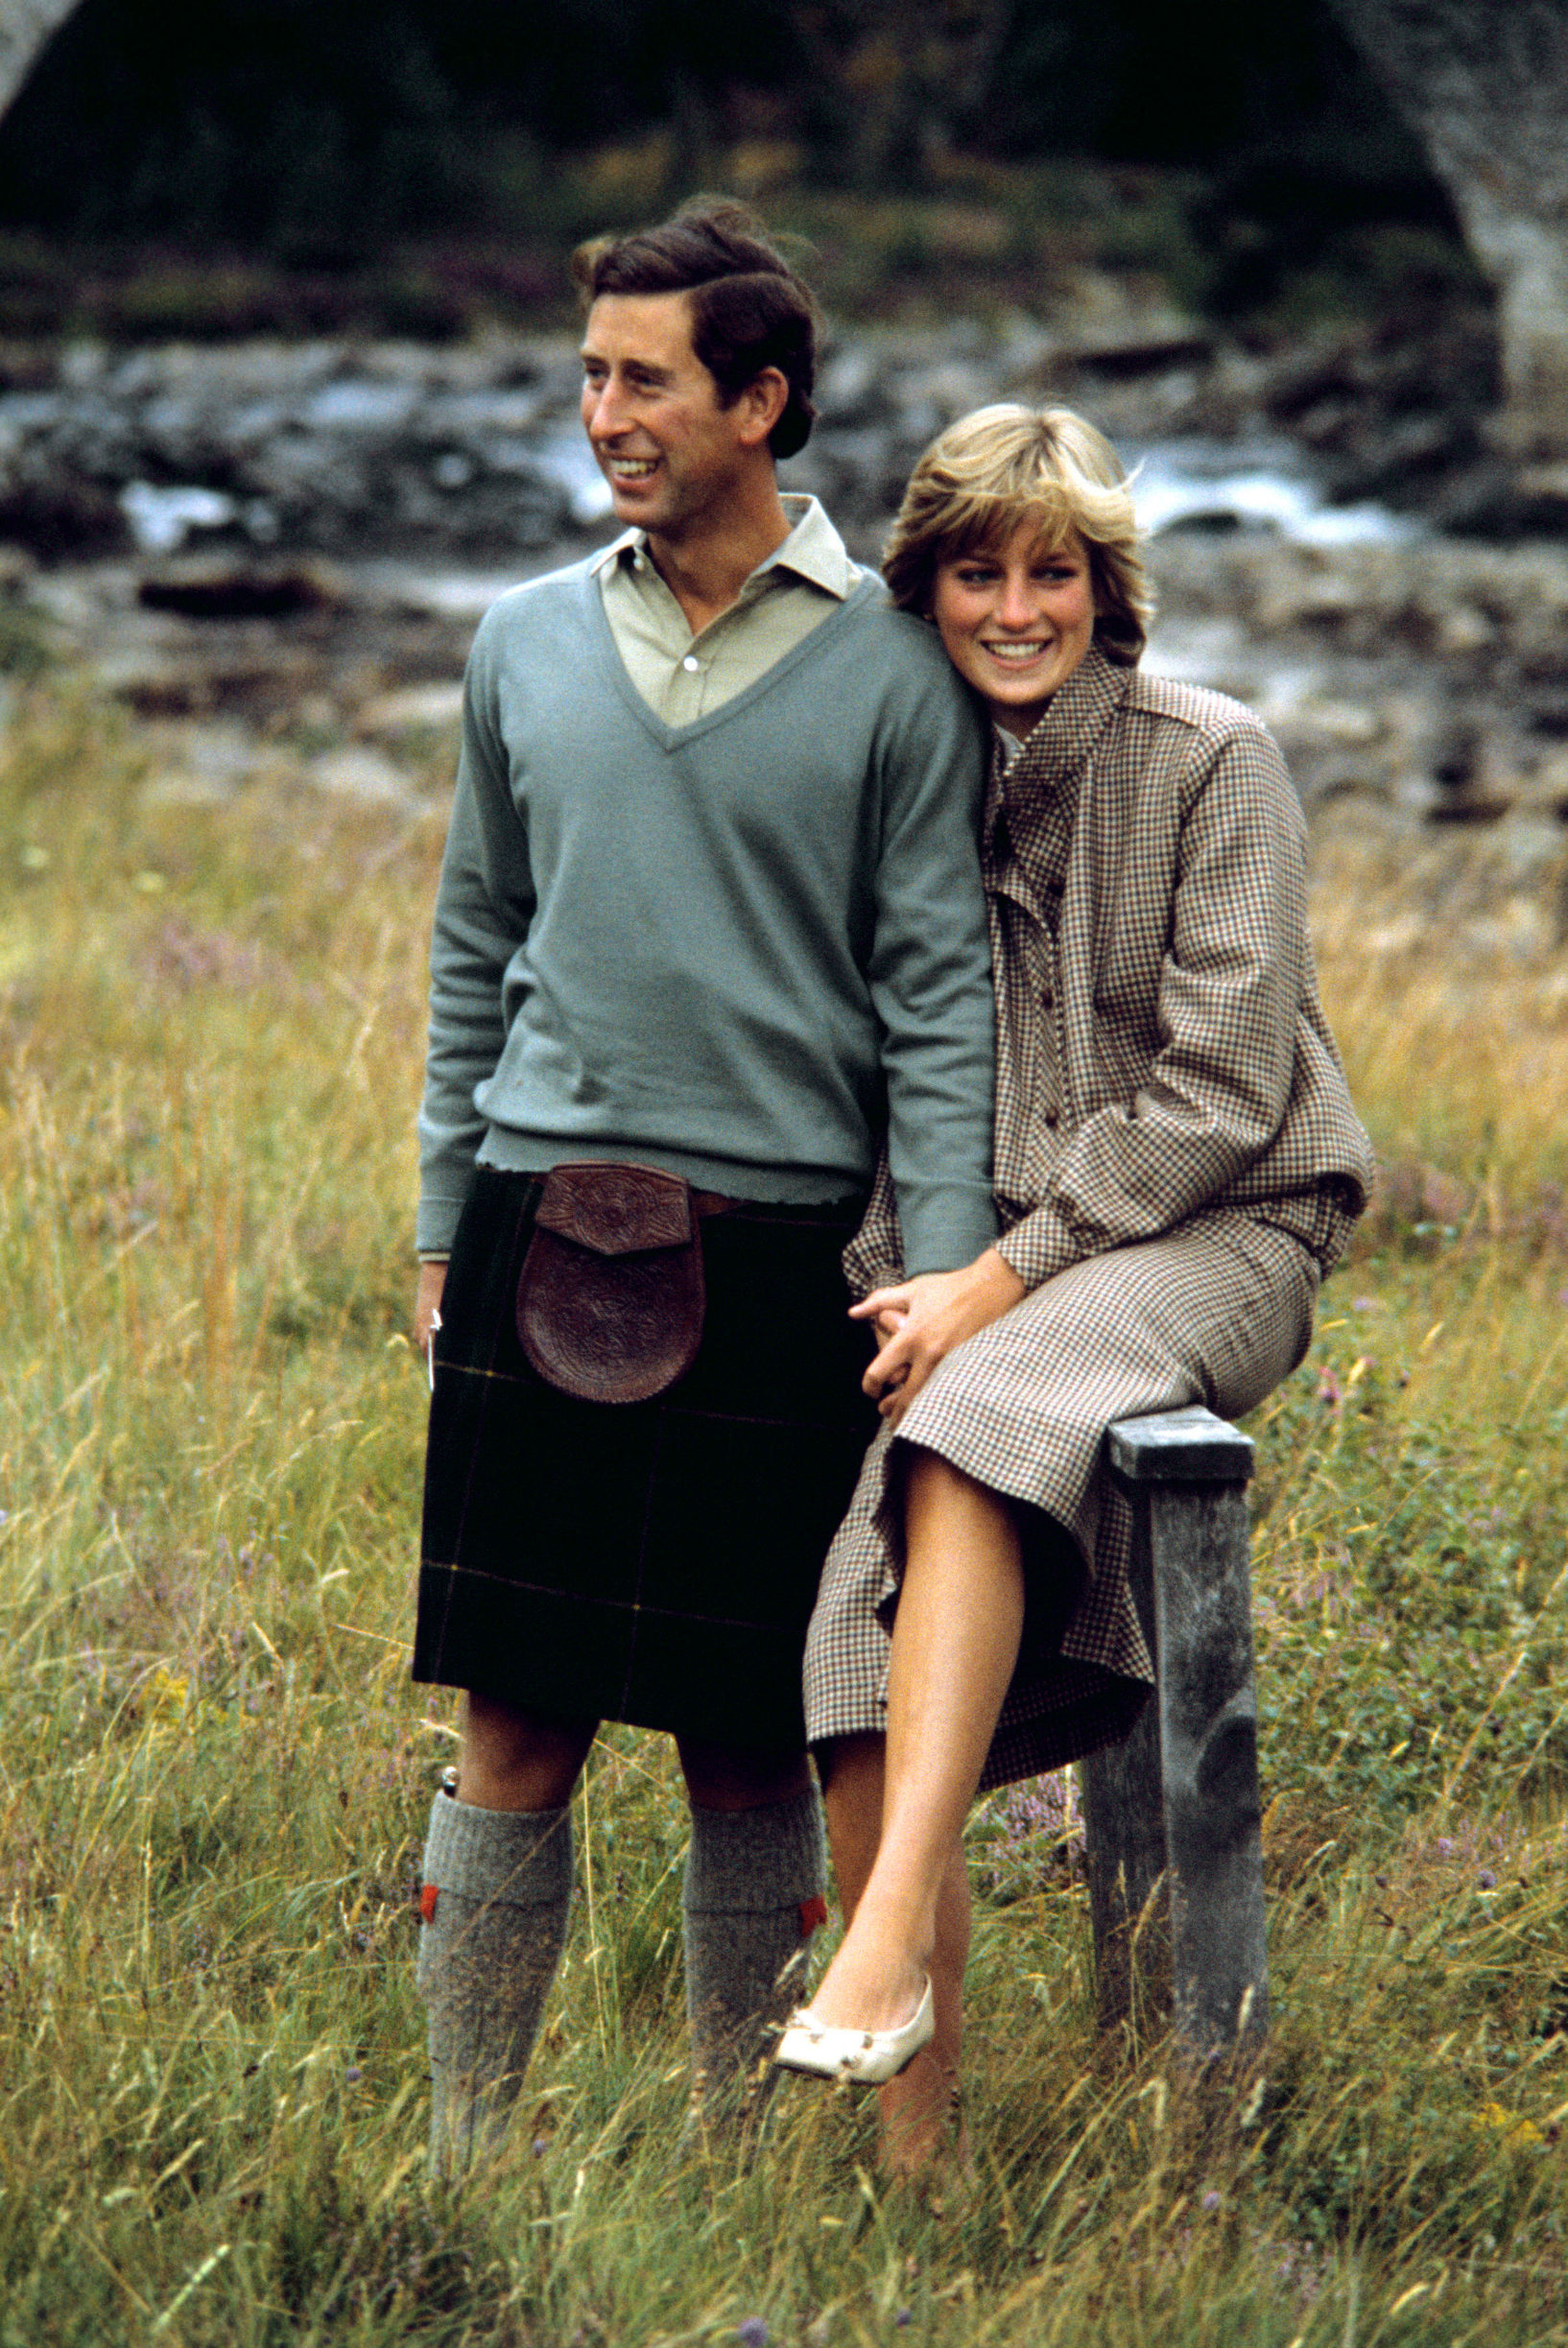 File photo dated 19/08/81 of the Prince and Princess of Wales on holiday in Balmoral. Diana's brown tweed wool day suit features in a new exhibition at Kensington Palace charting the evolution of the Princess's style., Image: 321860401, License: Rights-managed, Restrictions: FILE PHOTO, Model Release: no, Credit line: PA / PA Images / Profimedia